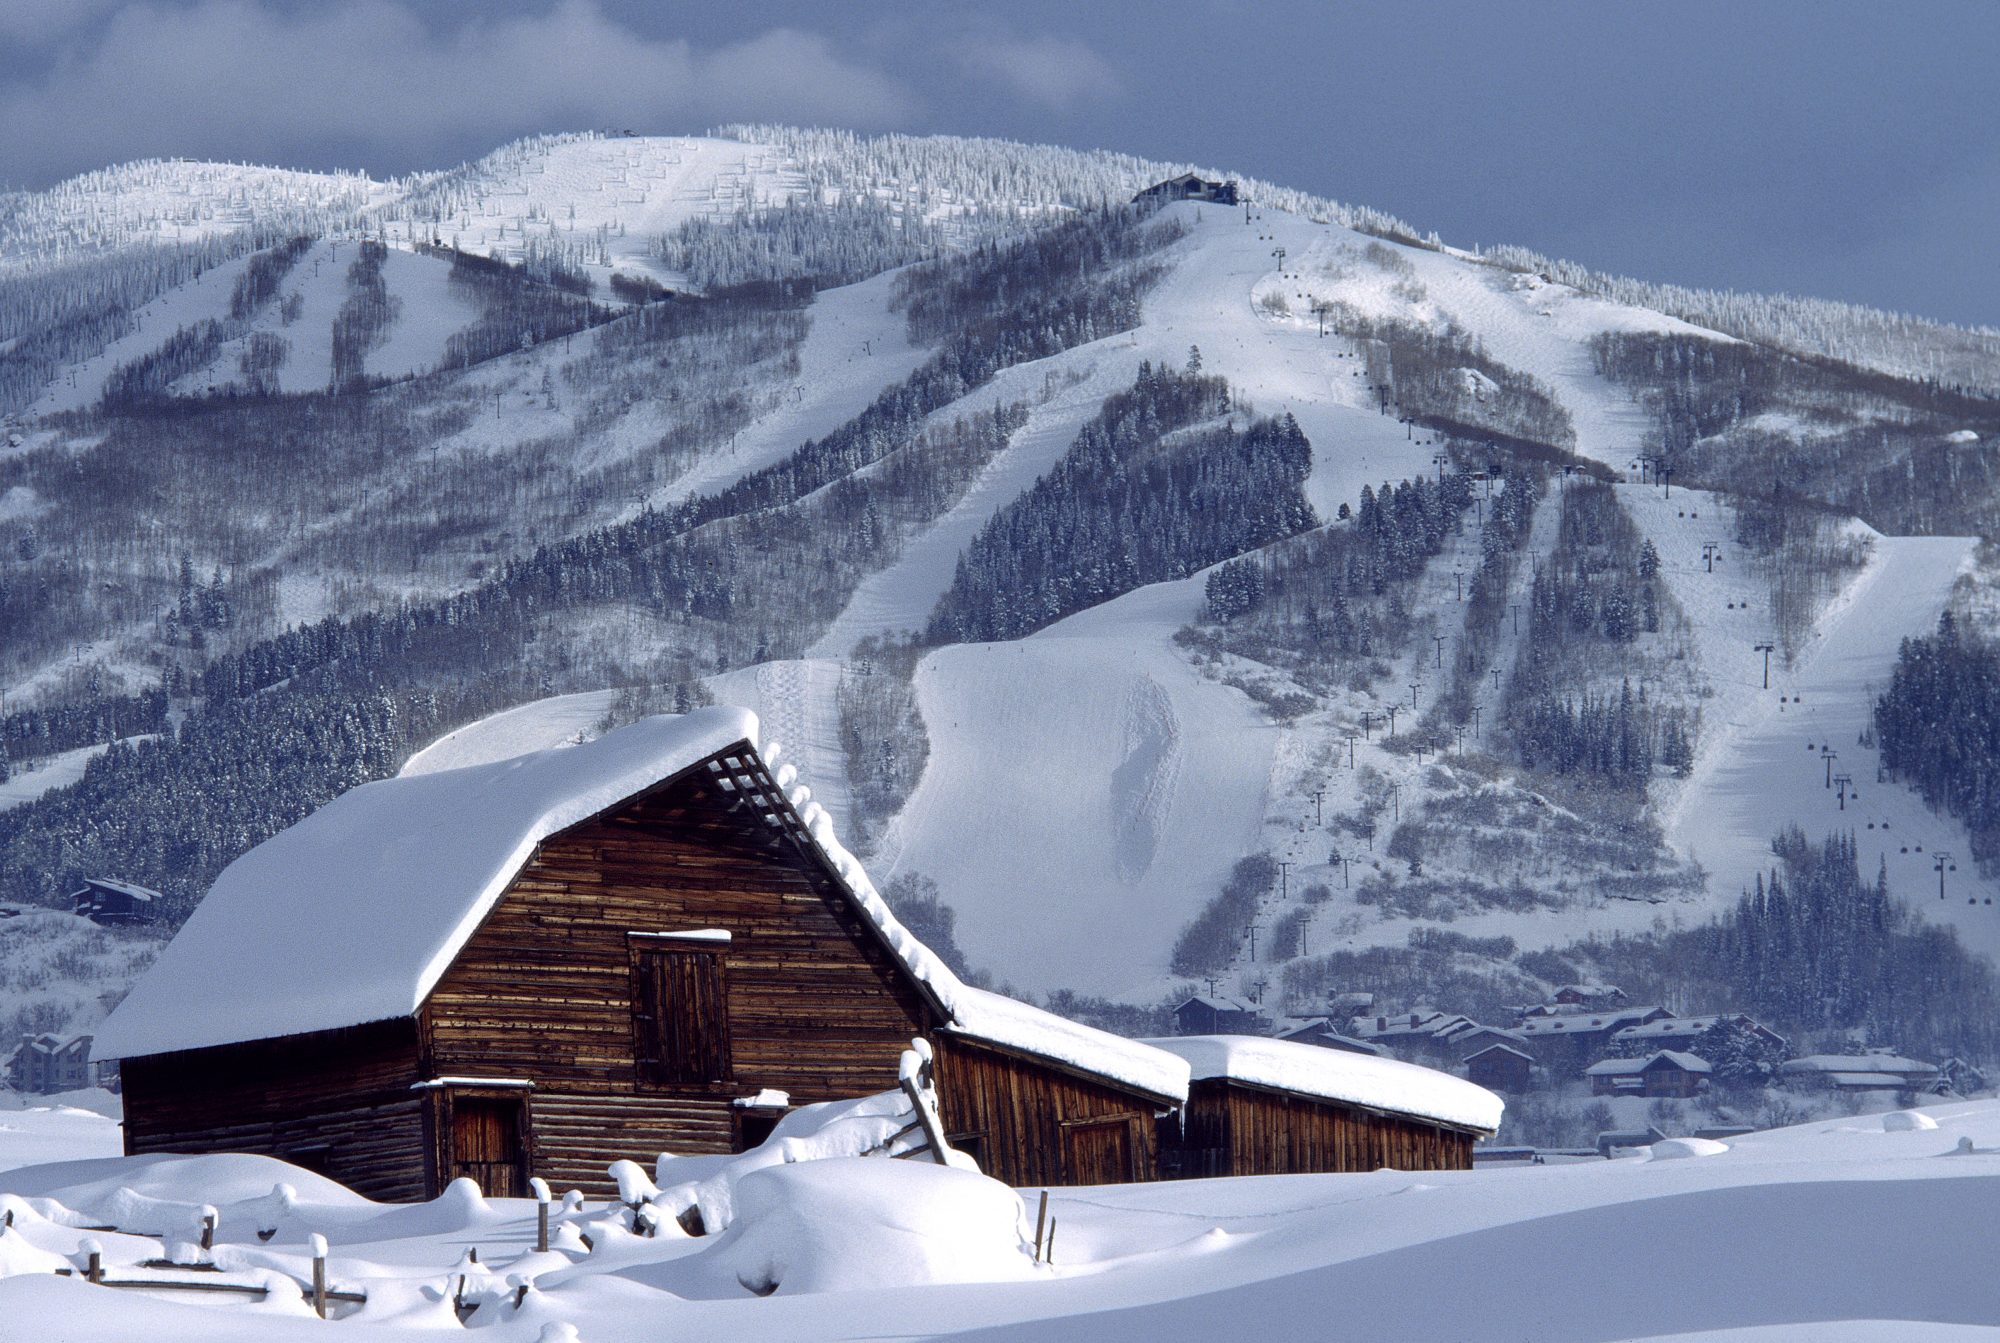 Steamboat Resort - Barn - Photo: Loryn Kaster - Alterra Resorts. Was the past one a great ski season? Enjoy it for now!